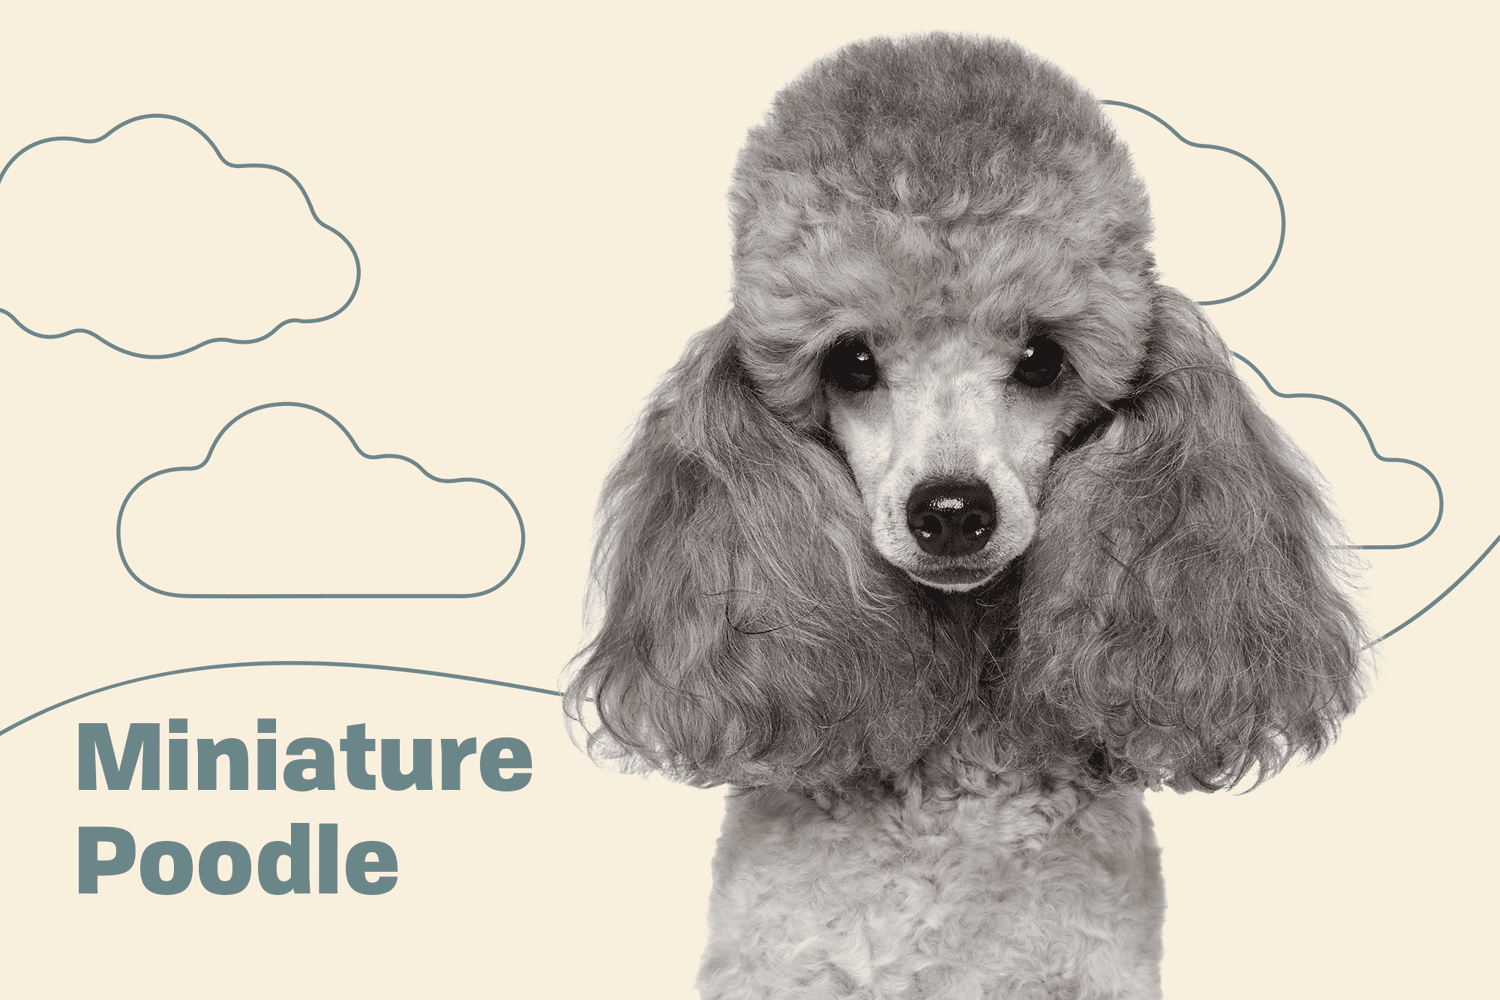 Poodle Miniature Dog Breed Information Characteristics Daily Paws